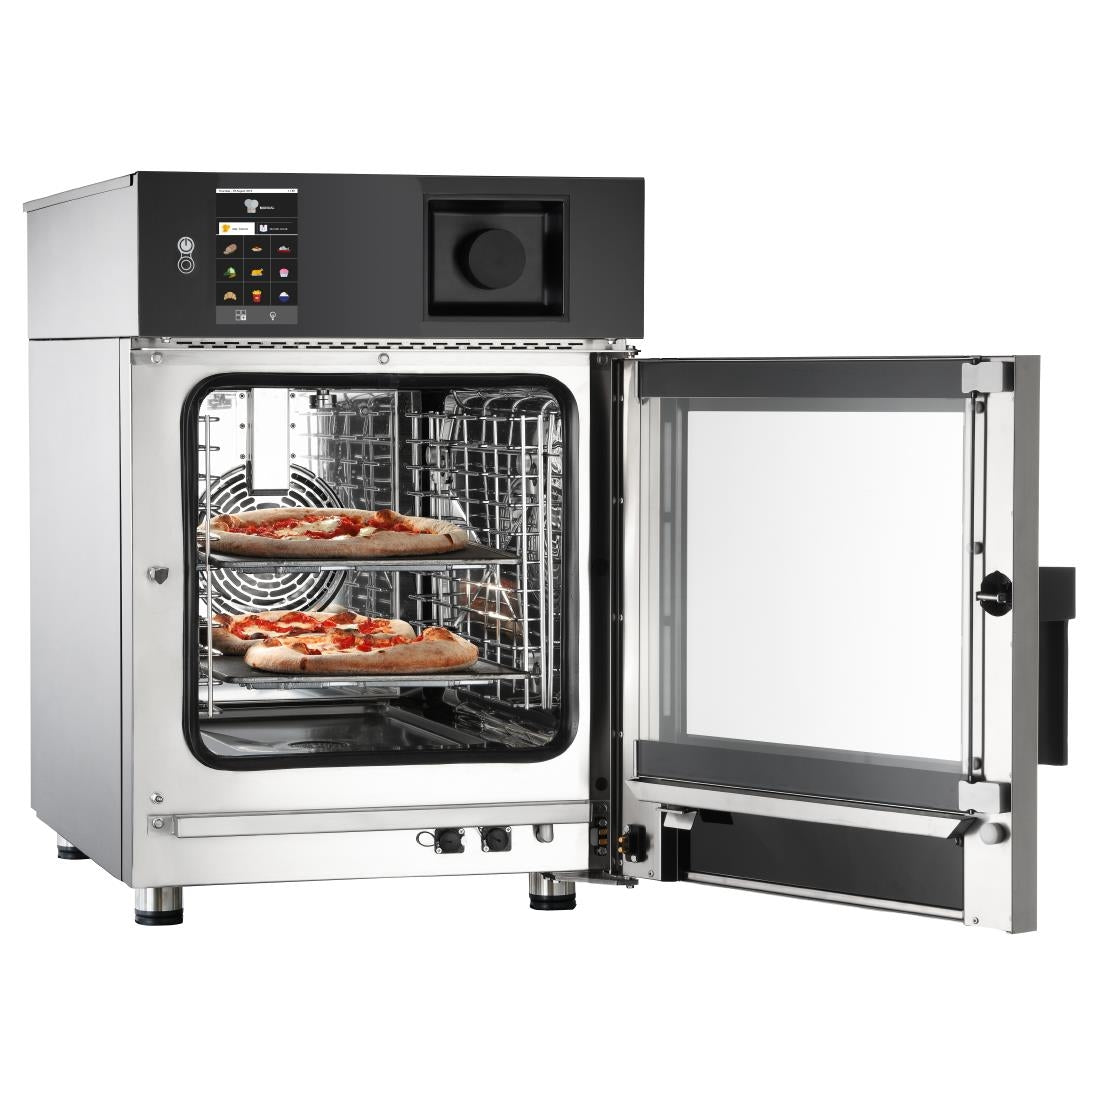 FW871 Giorik Kore KM061W 6 x 1/1GN Slimline Electric Combi Oven with Wash System JD Catering Equipment Solutions Ltd